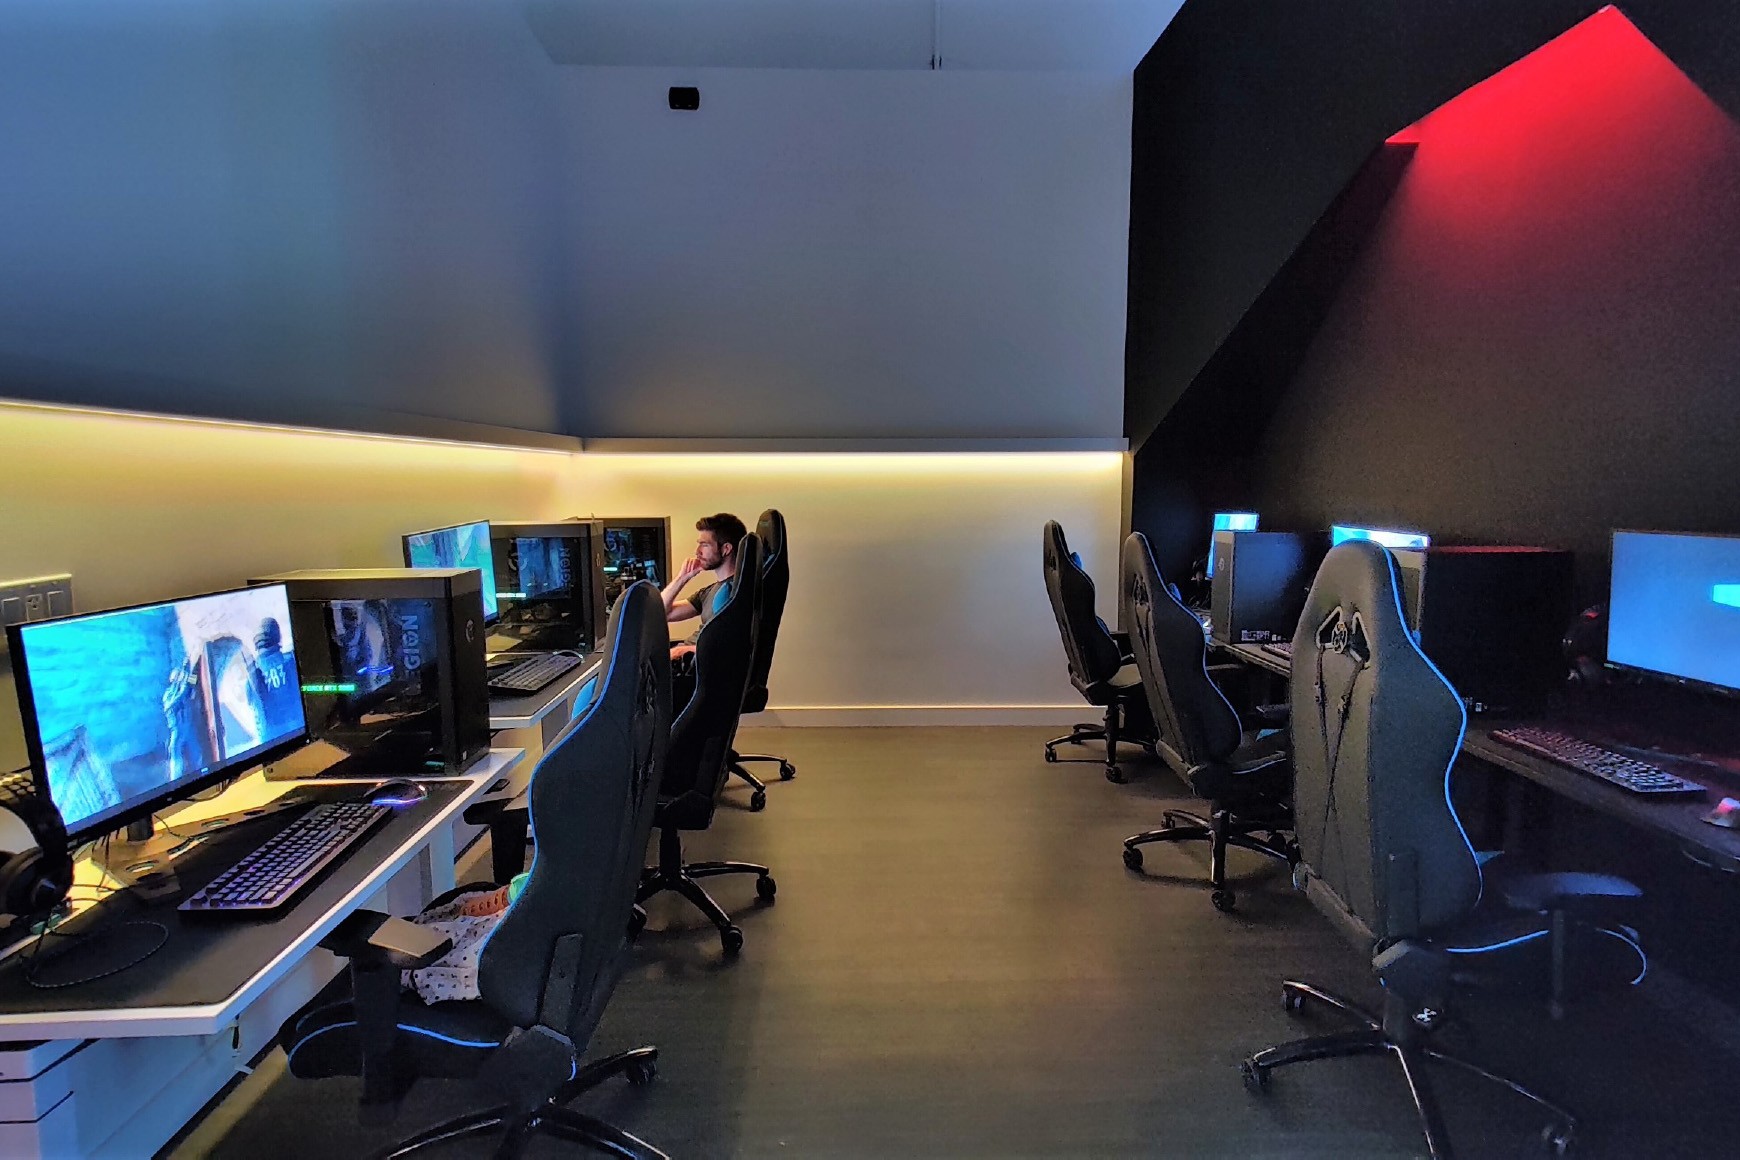 Two rows of gaming computers are set up against opposite walls, with ambient lighting throughout